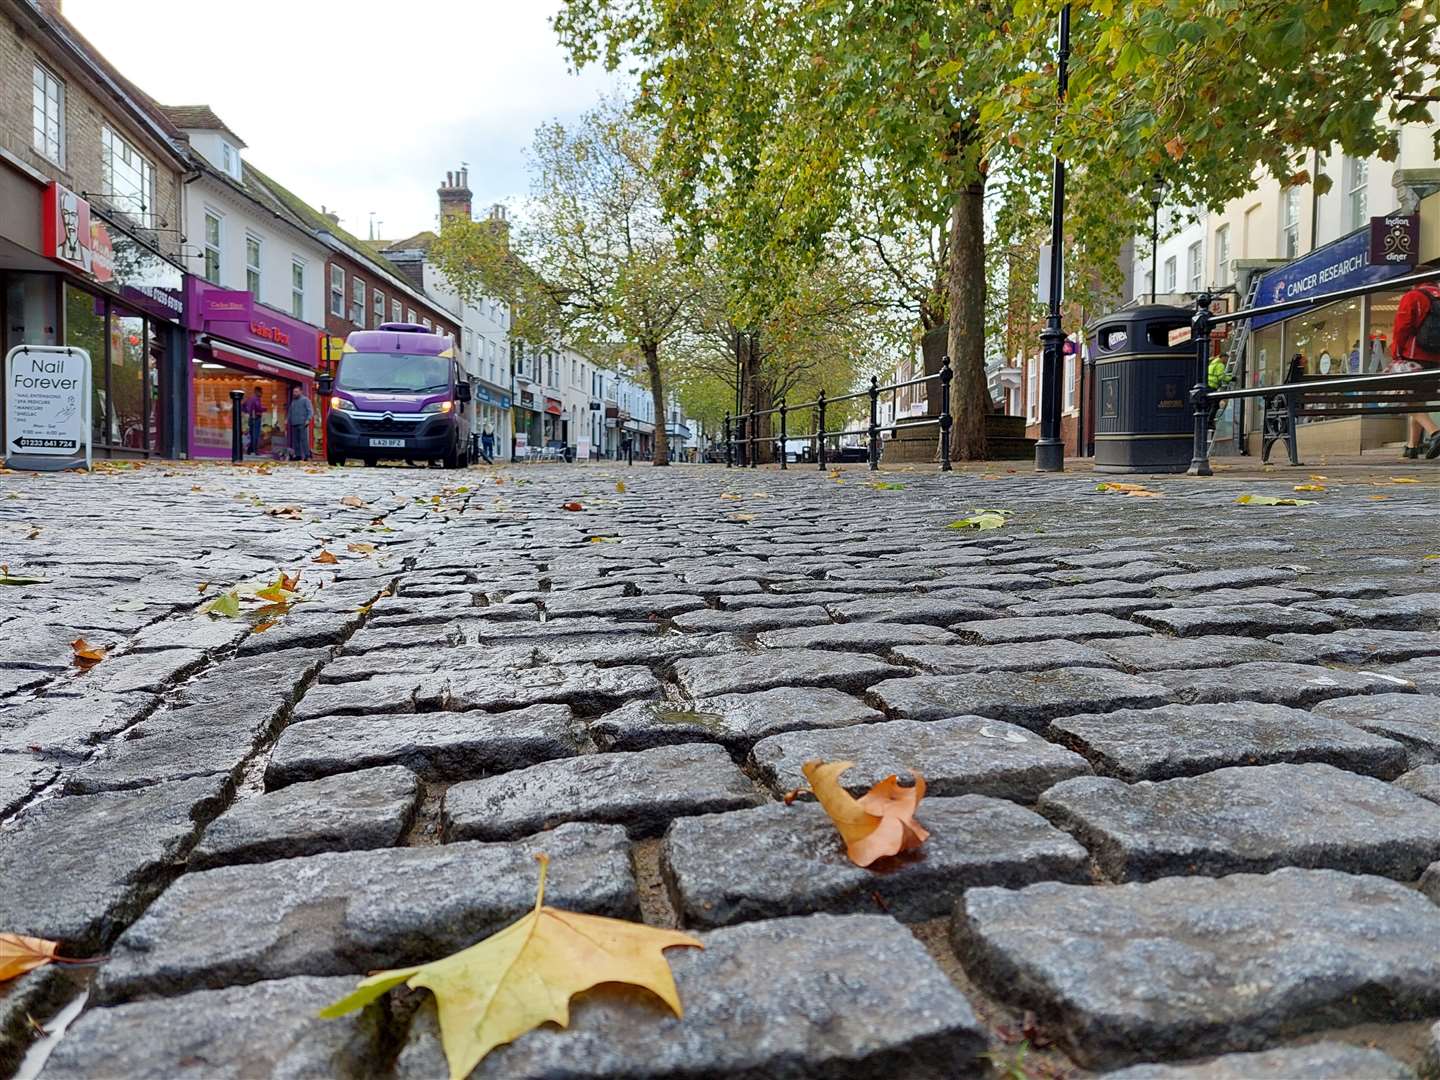 The cobbles in Ashford are set to be replaced with black tarmac